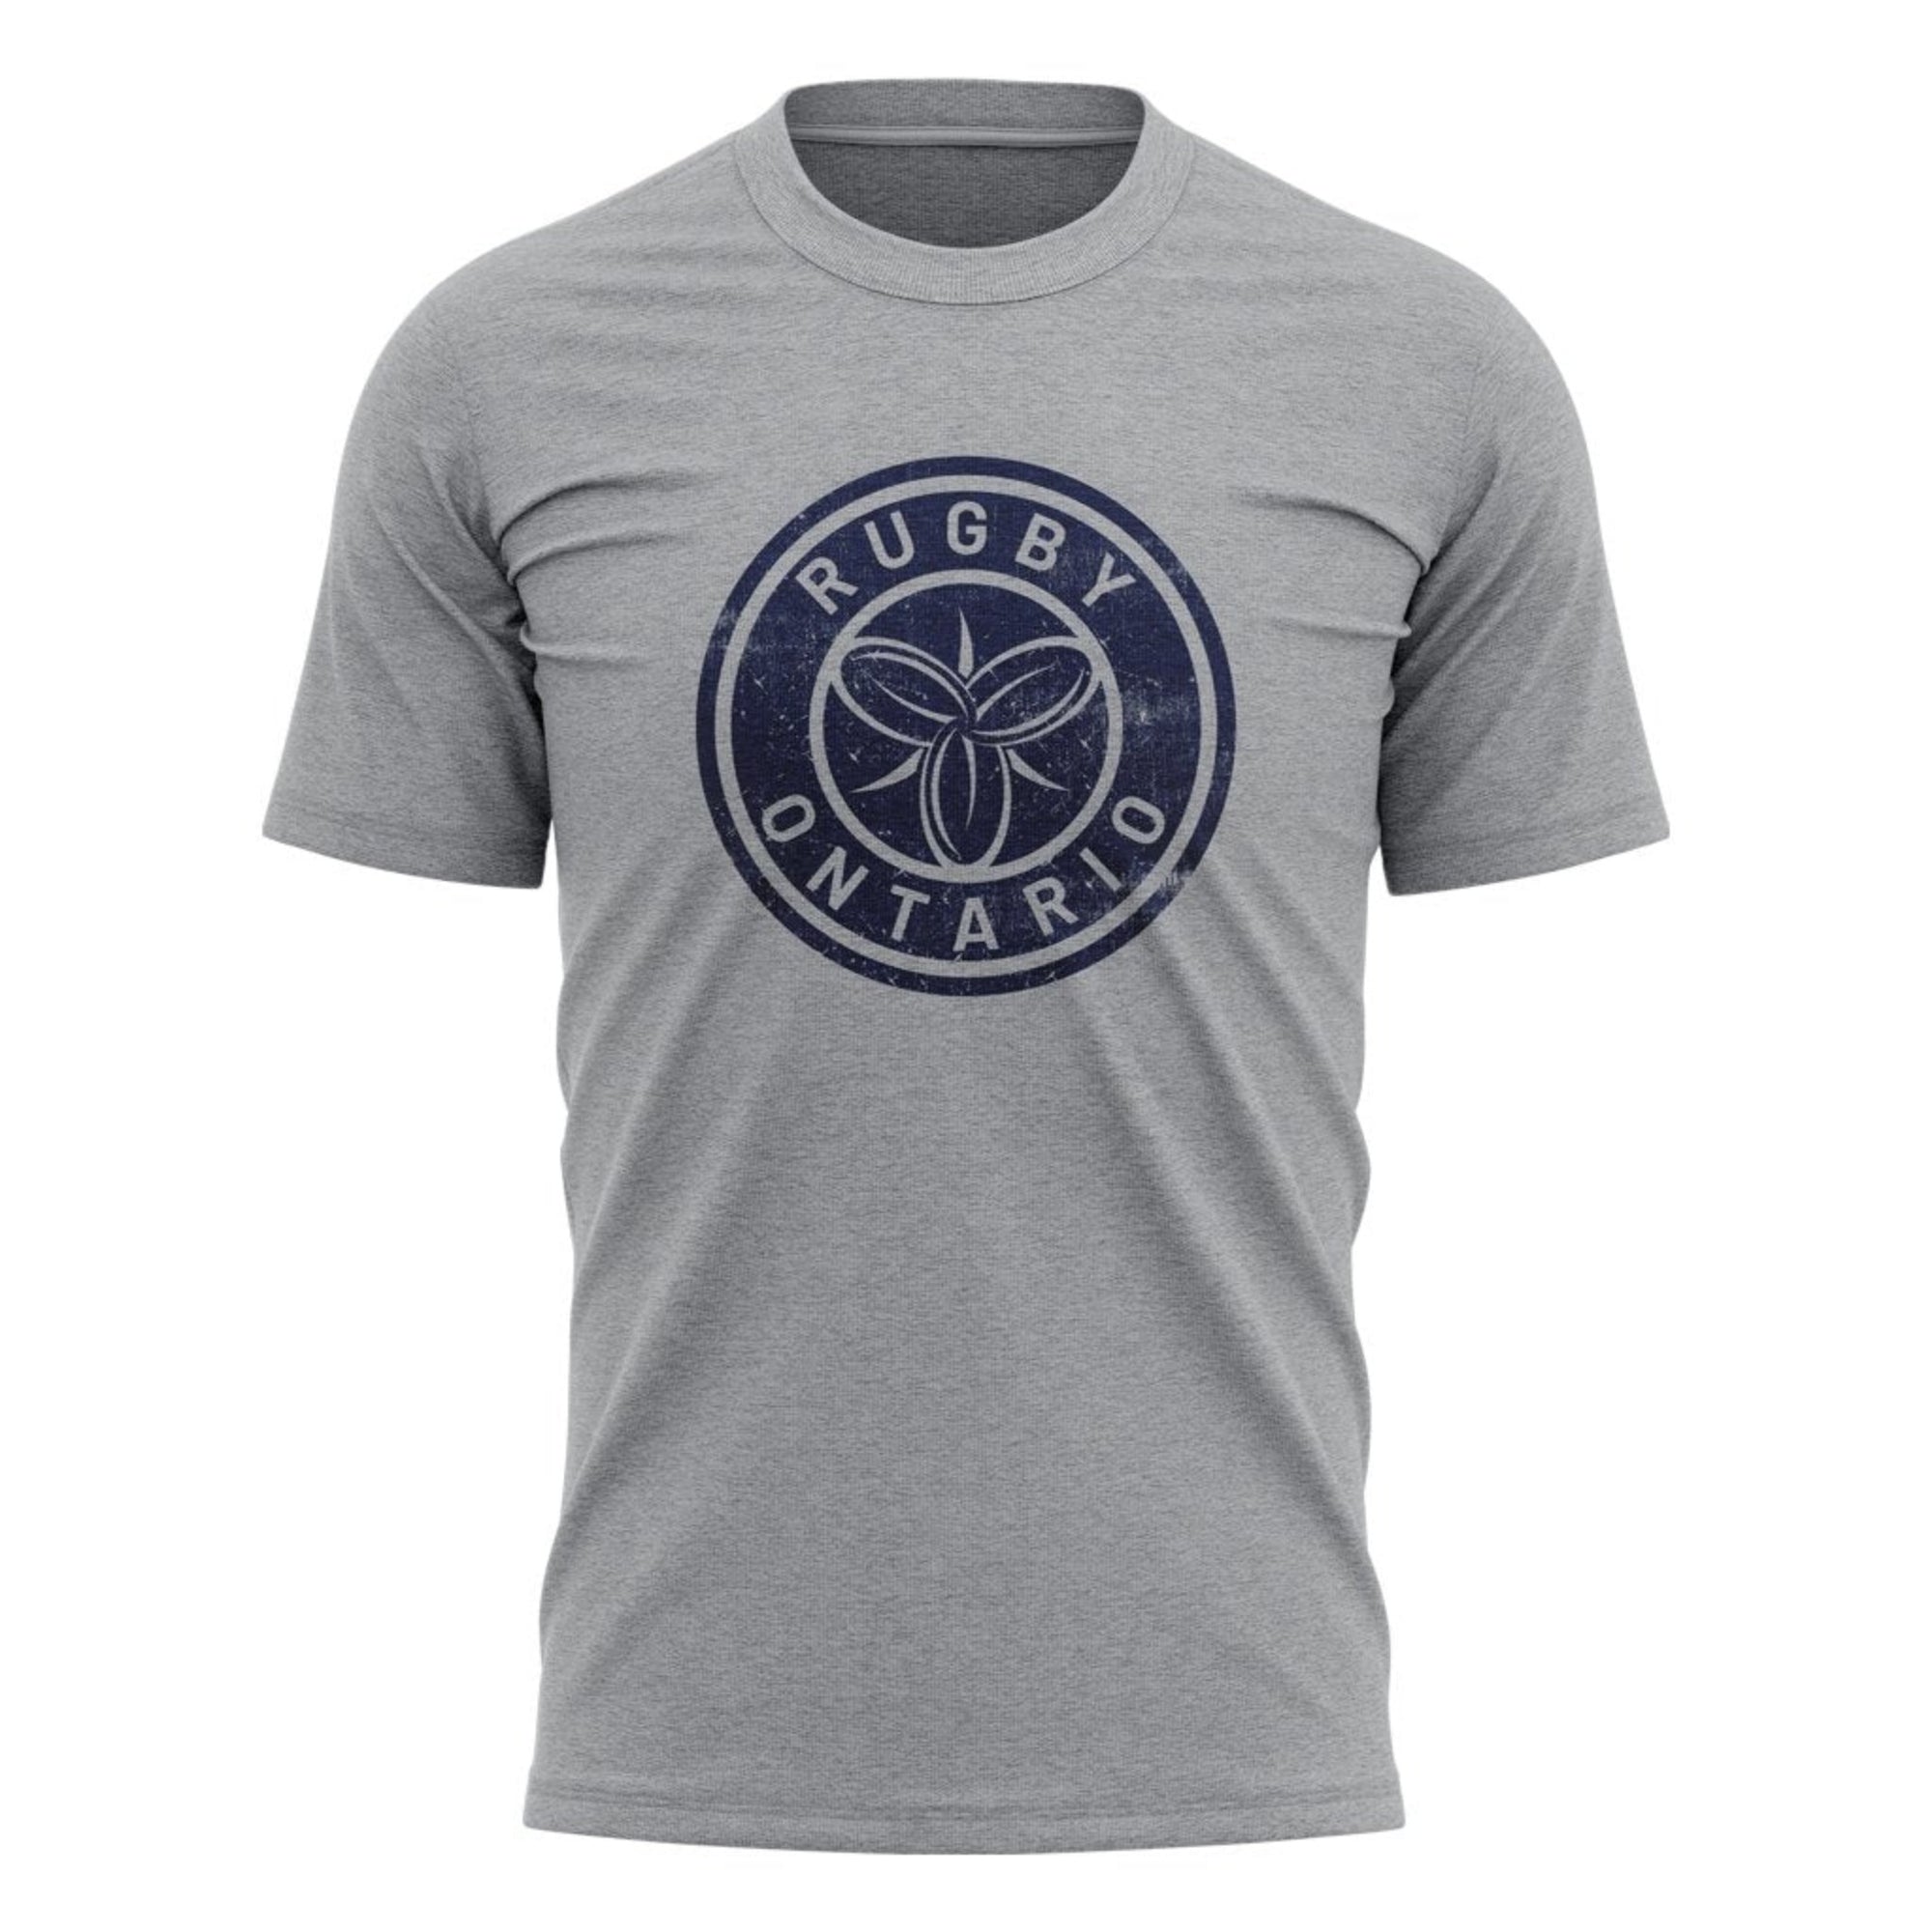 Rugby Ontario "Distress" Tee - Men's Sizing XS-4XL  - Athletic Grey